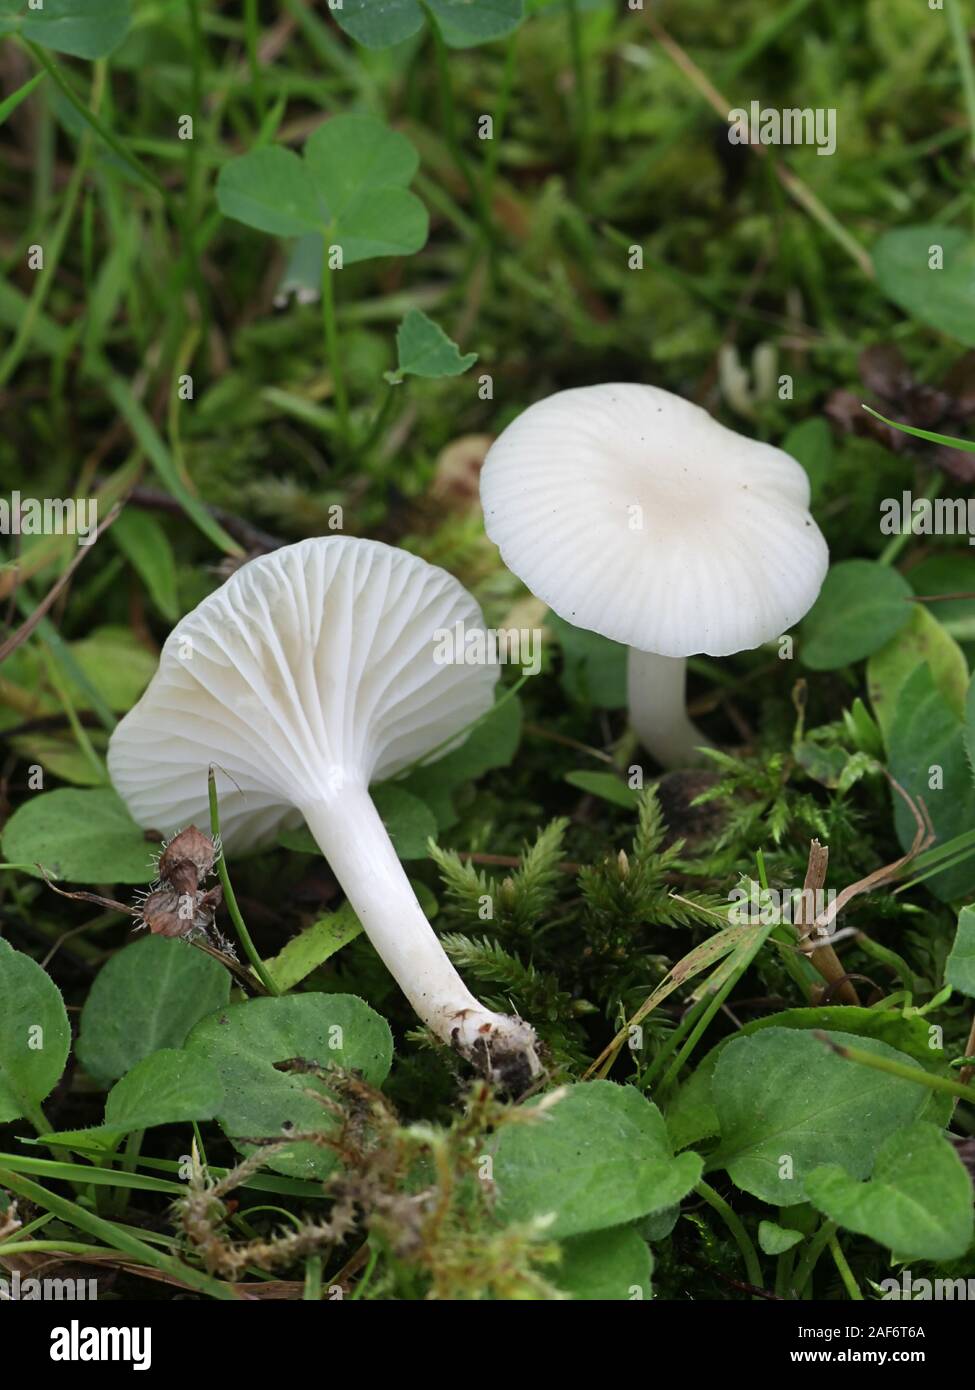 Cuphophyllus virgineus, known as the snowy waxcap, wild mushroom from Finlands Stock Photo